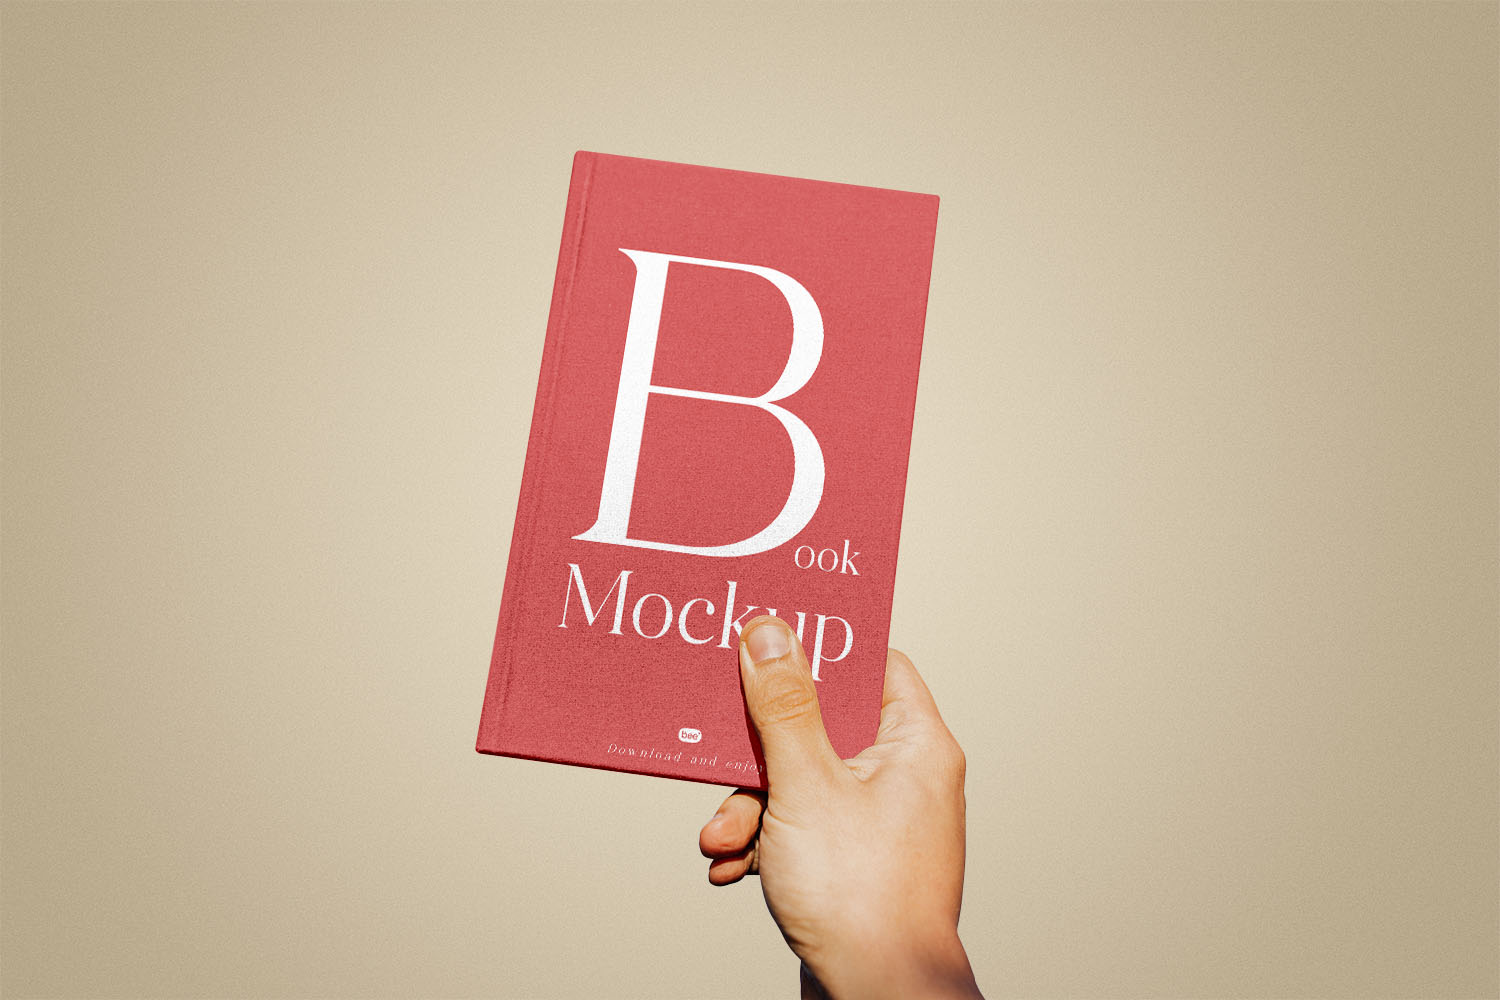 Book Cover in Hand Free Mockup